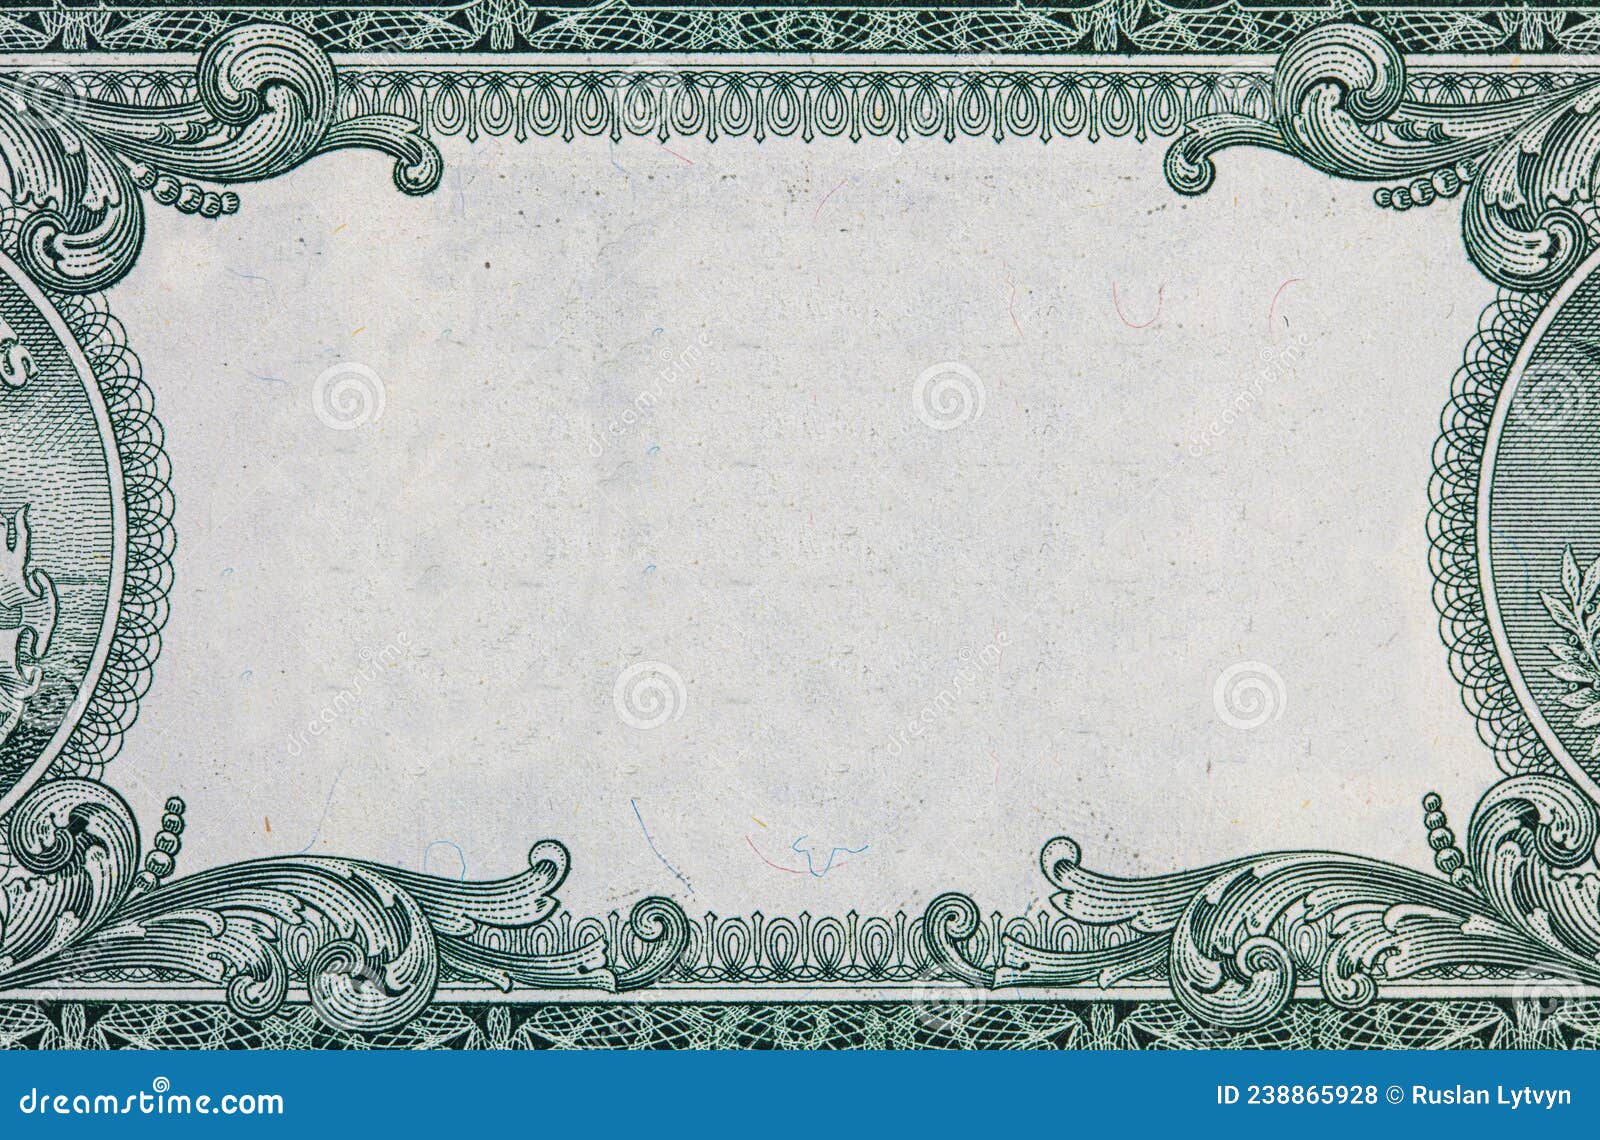 Textured 1 US Dollar Banknote. Elements Stock Photo - Image of banknote ...